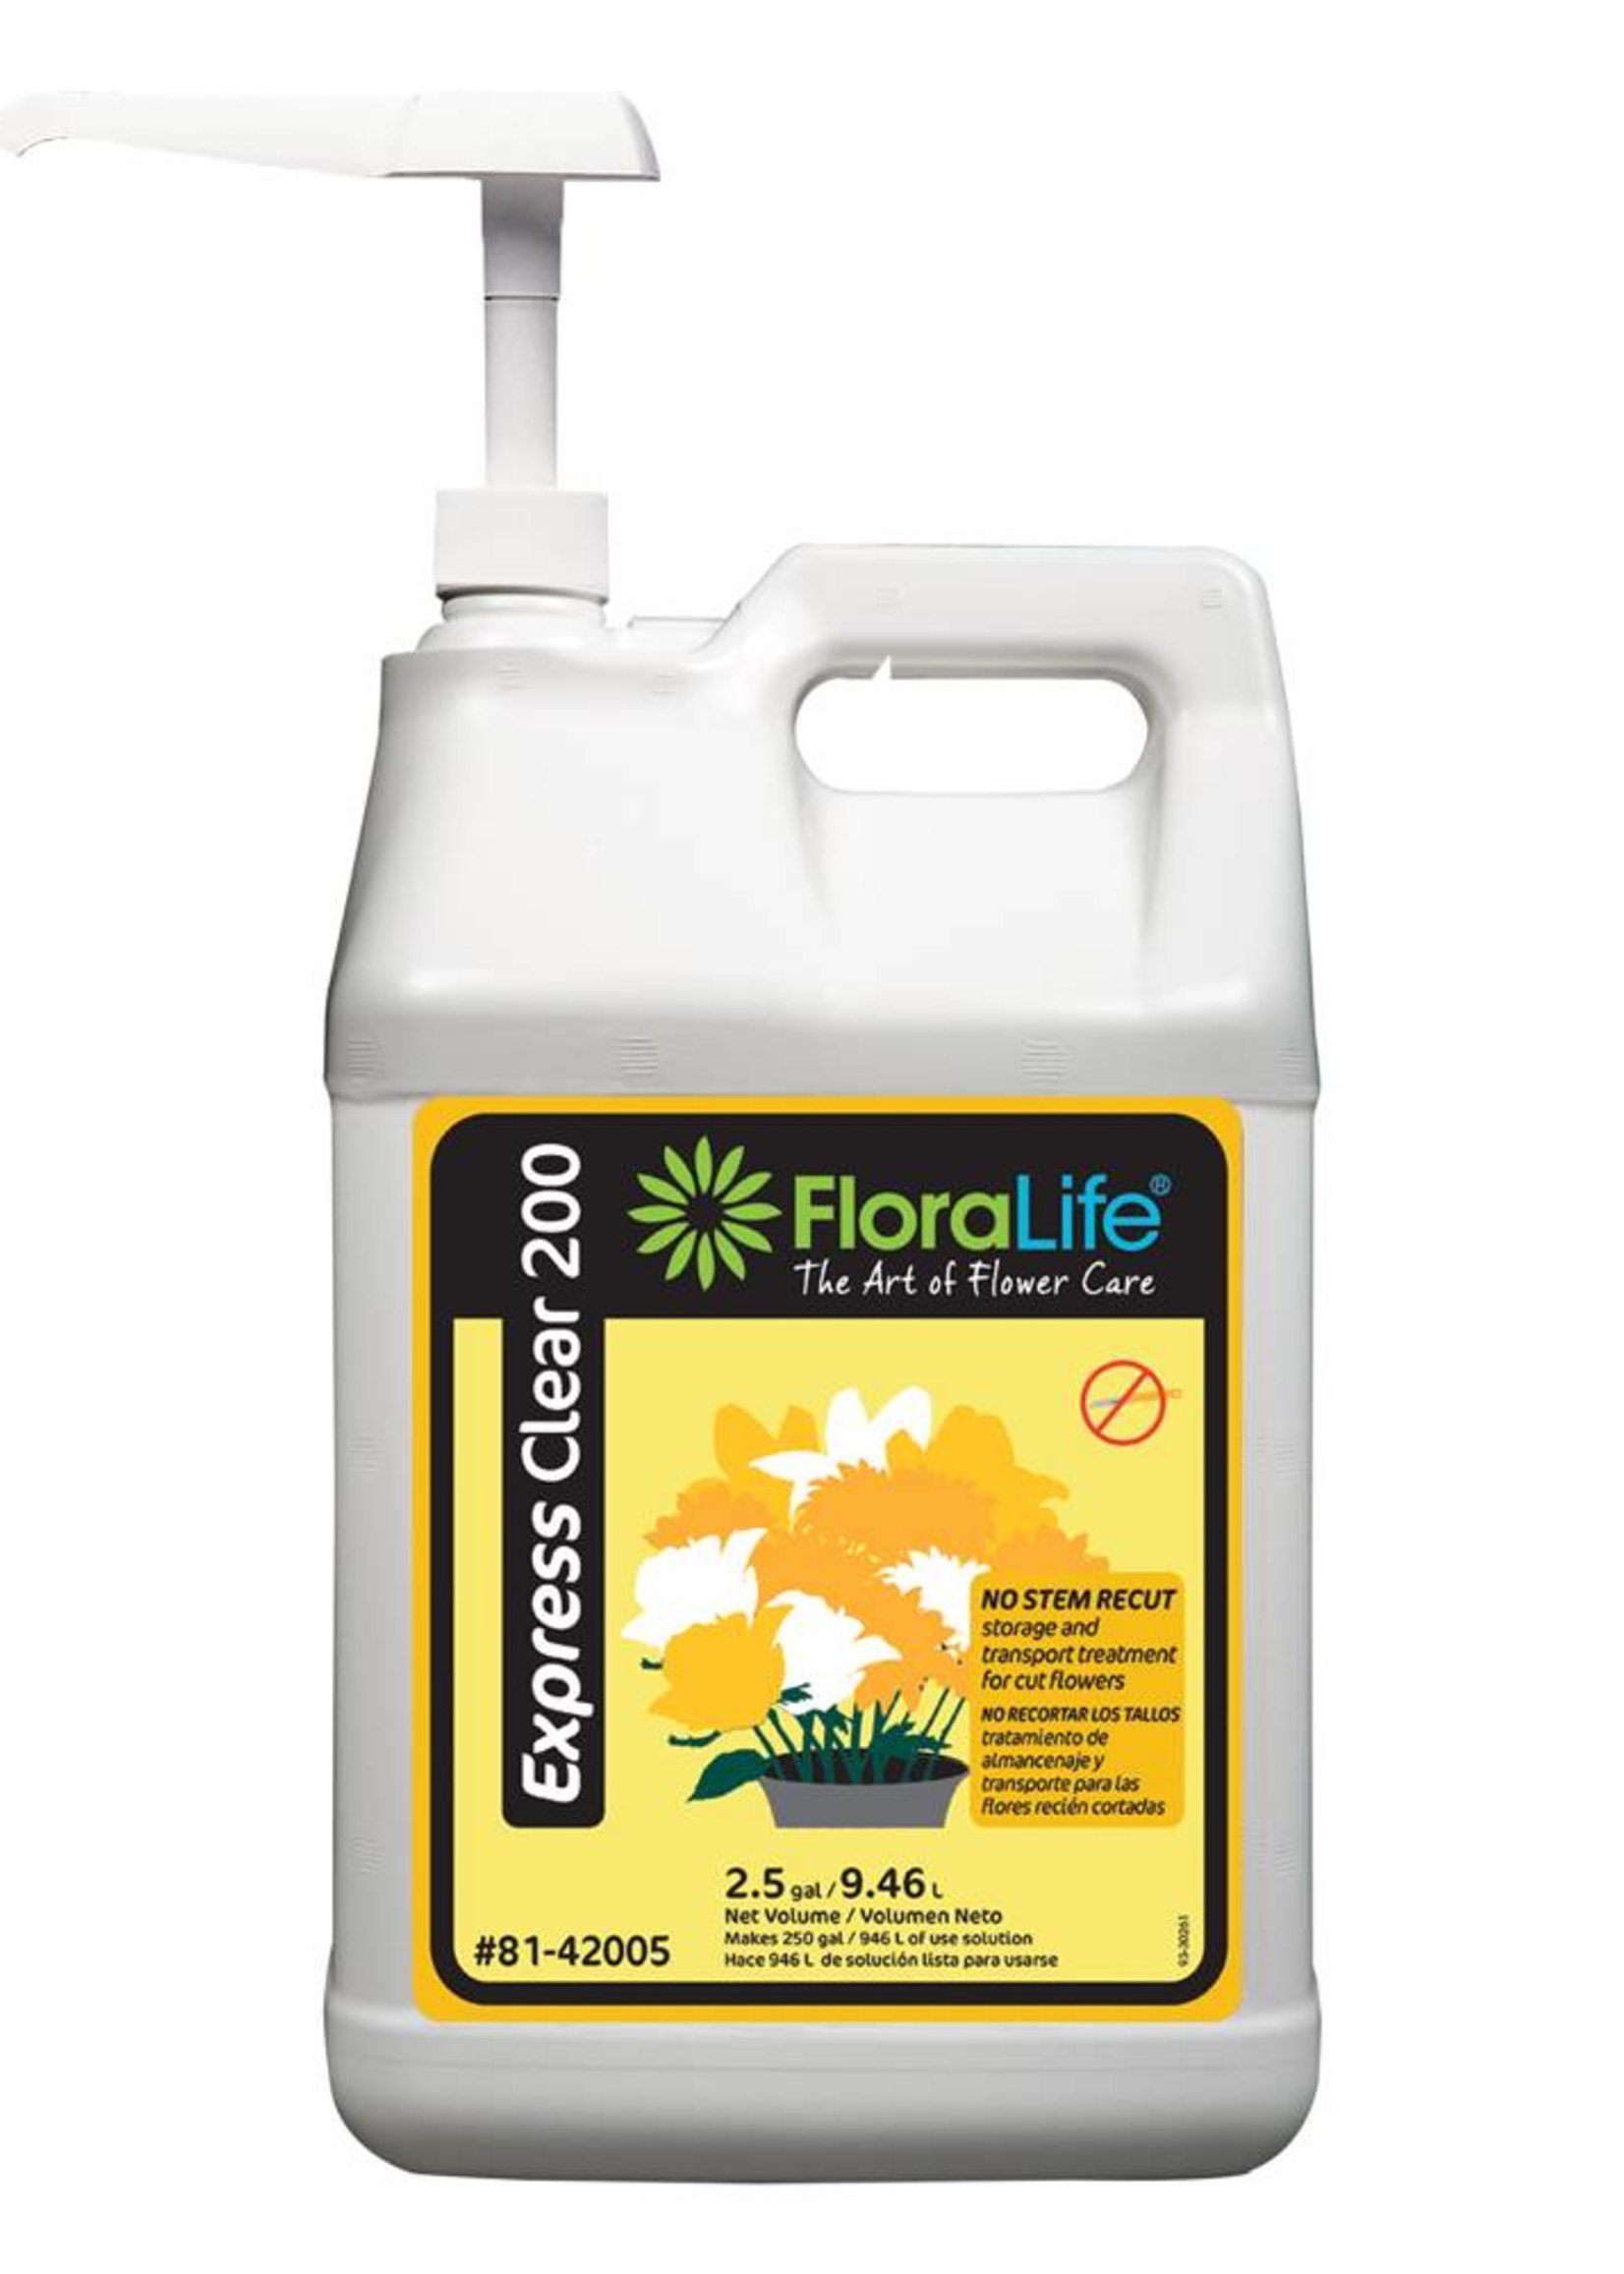 Floralife® Express Clear 200 storage and transport - NO PUMP